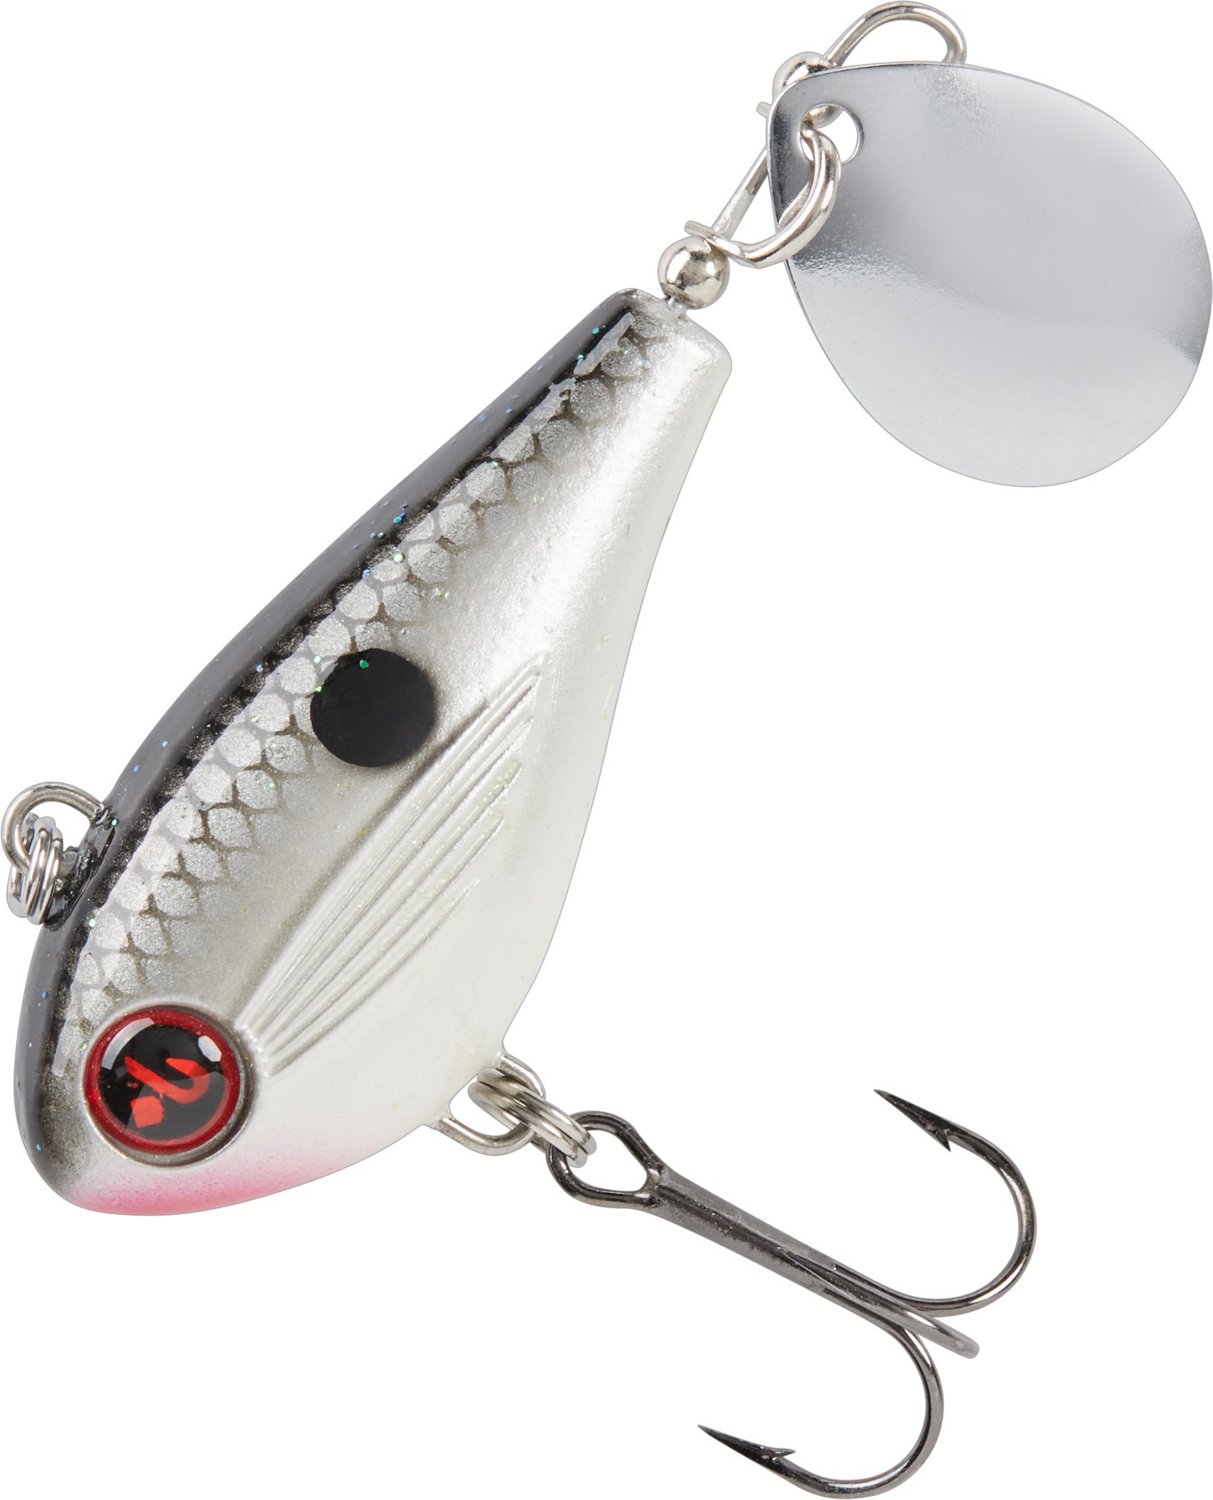 Academy Sports + Outdoors Blakemore Road Runner Crappie Thunder 1